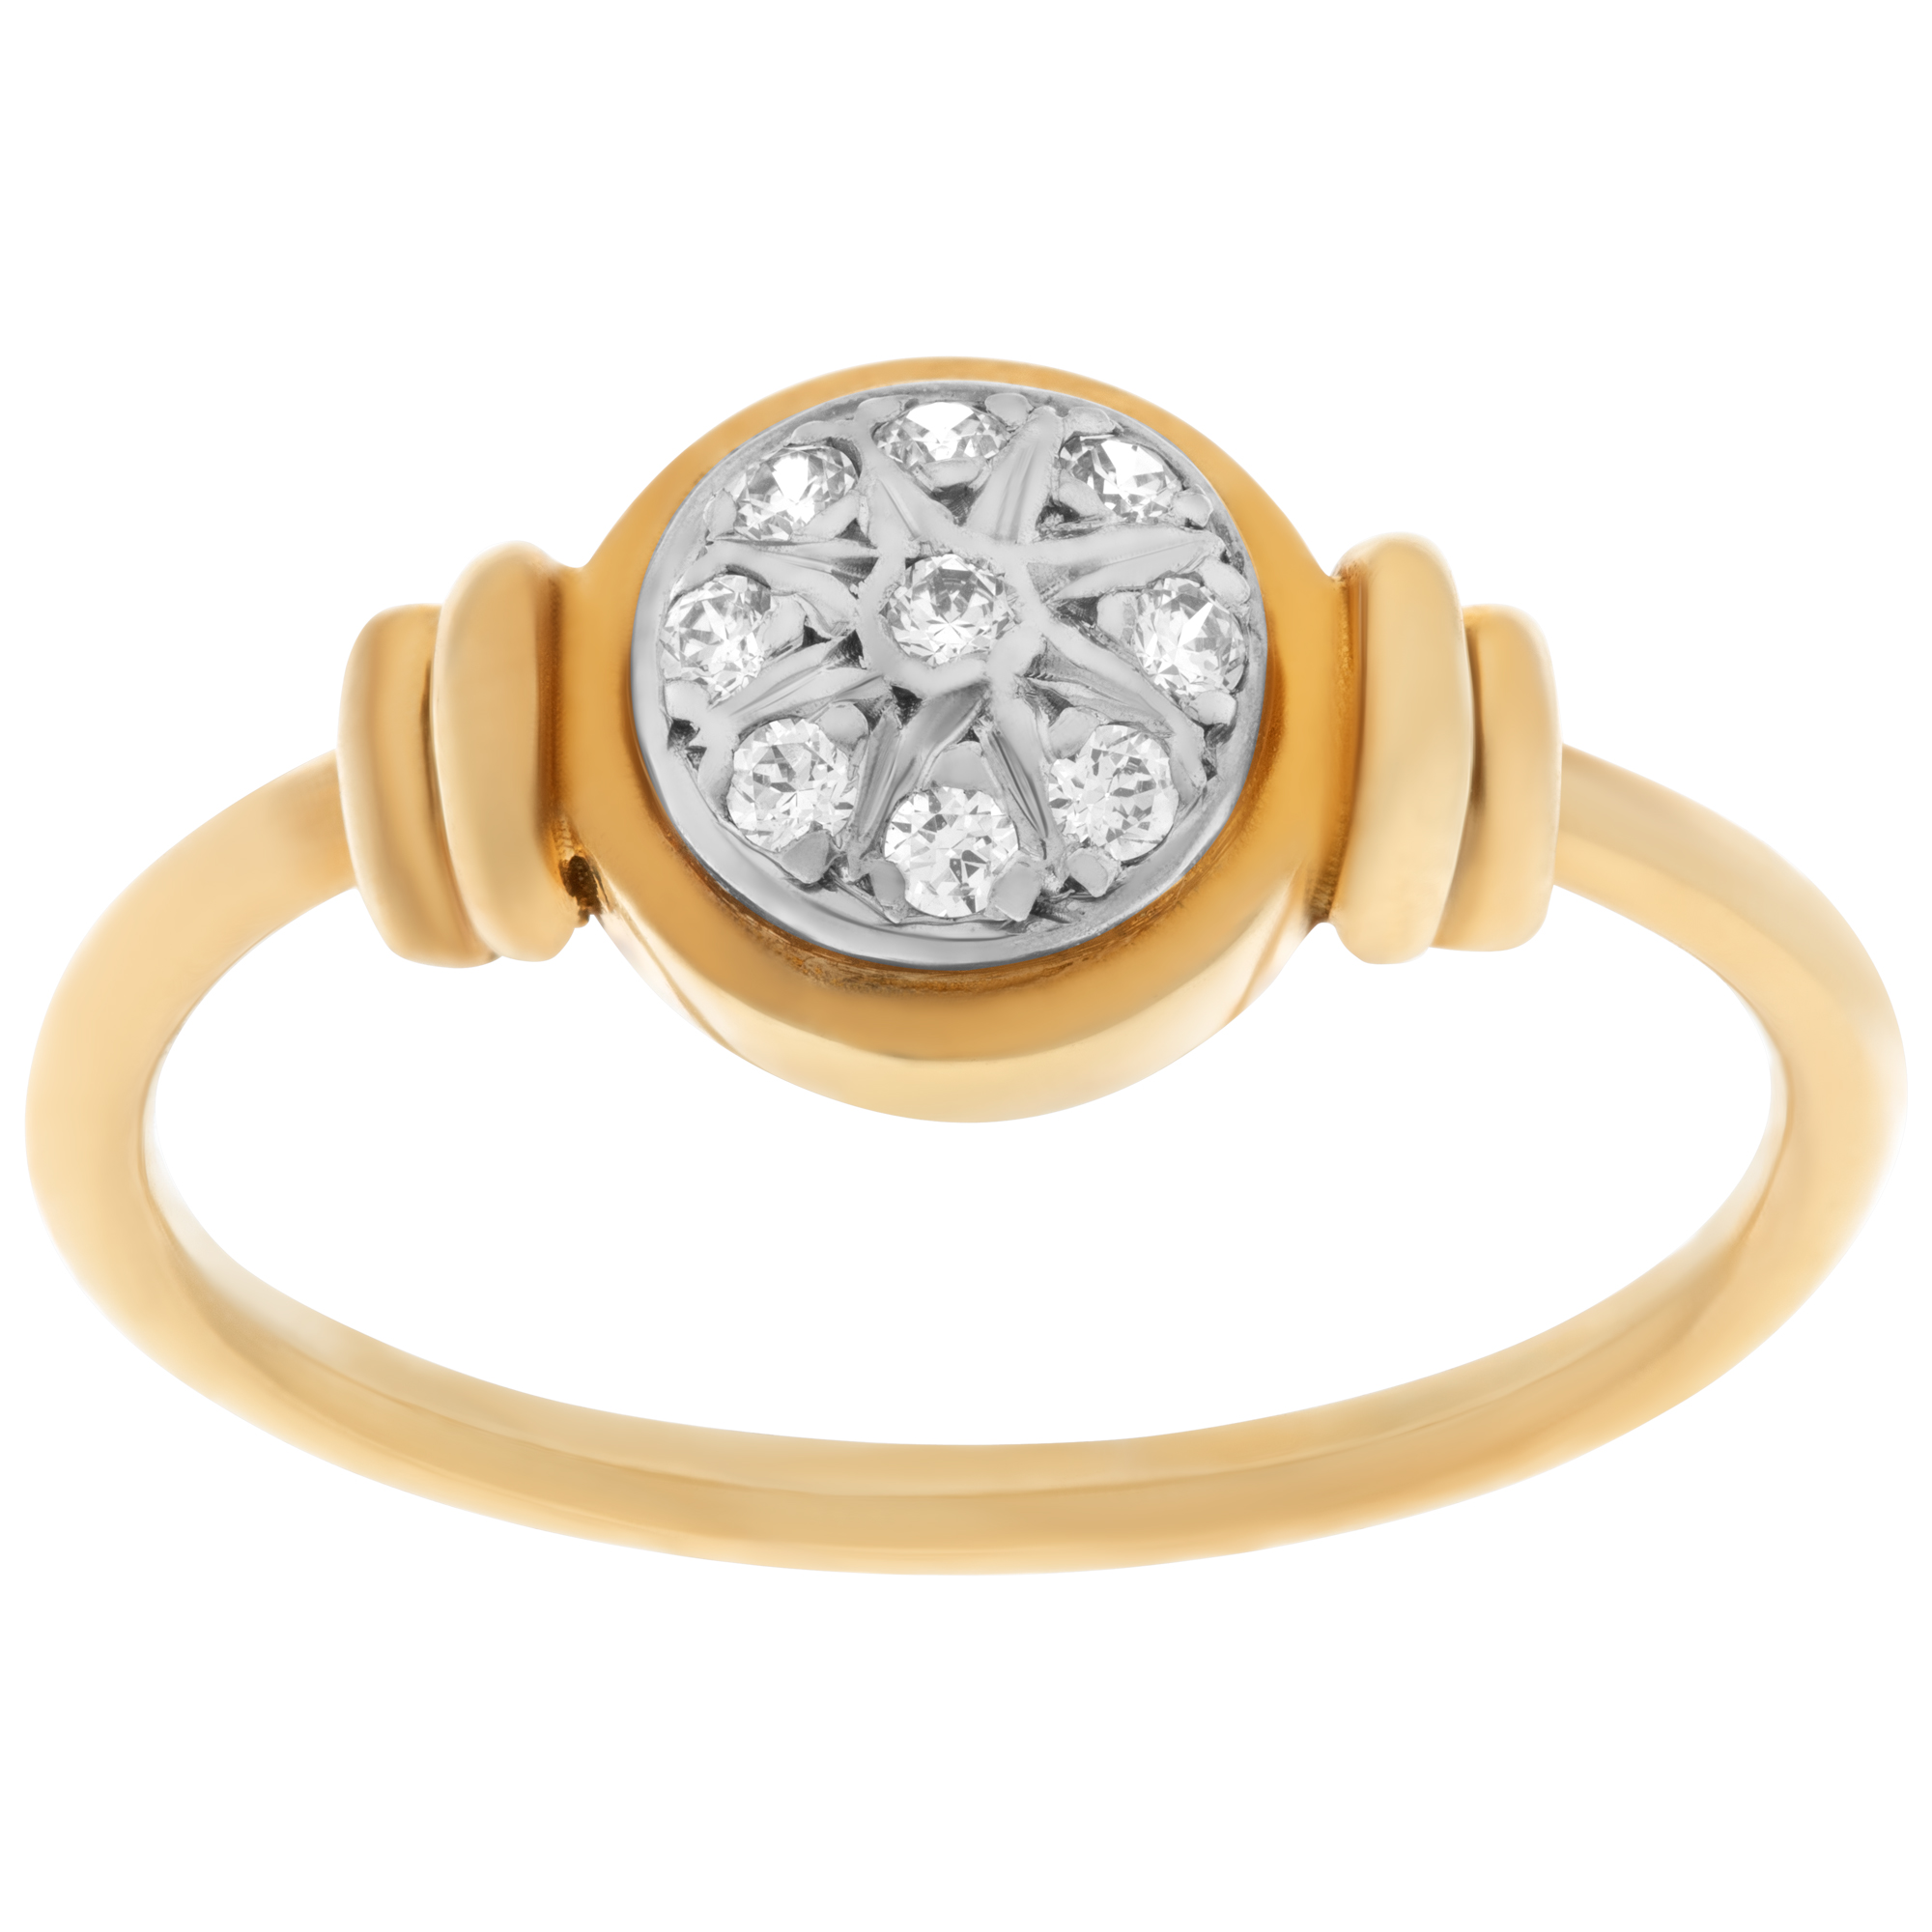 Charming vintage ring with approx 0.50 carat round brilliant diamond cut, set in 14K gold